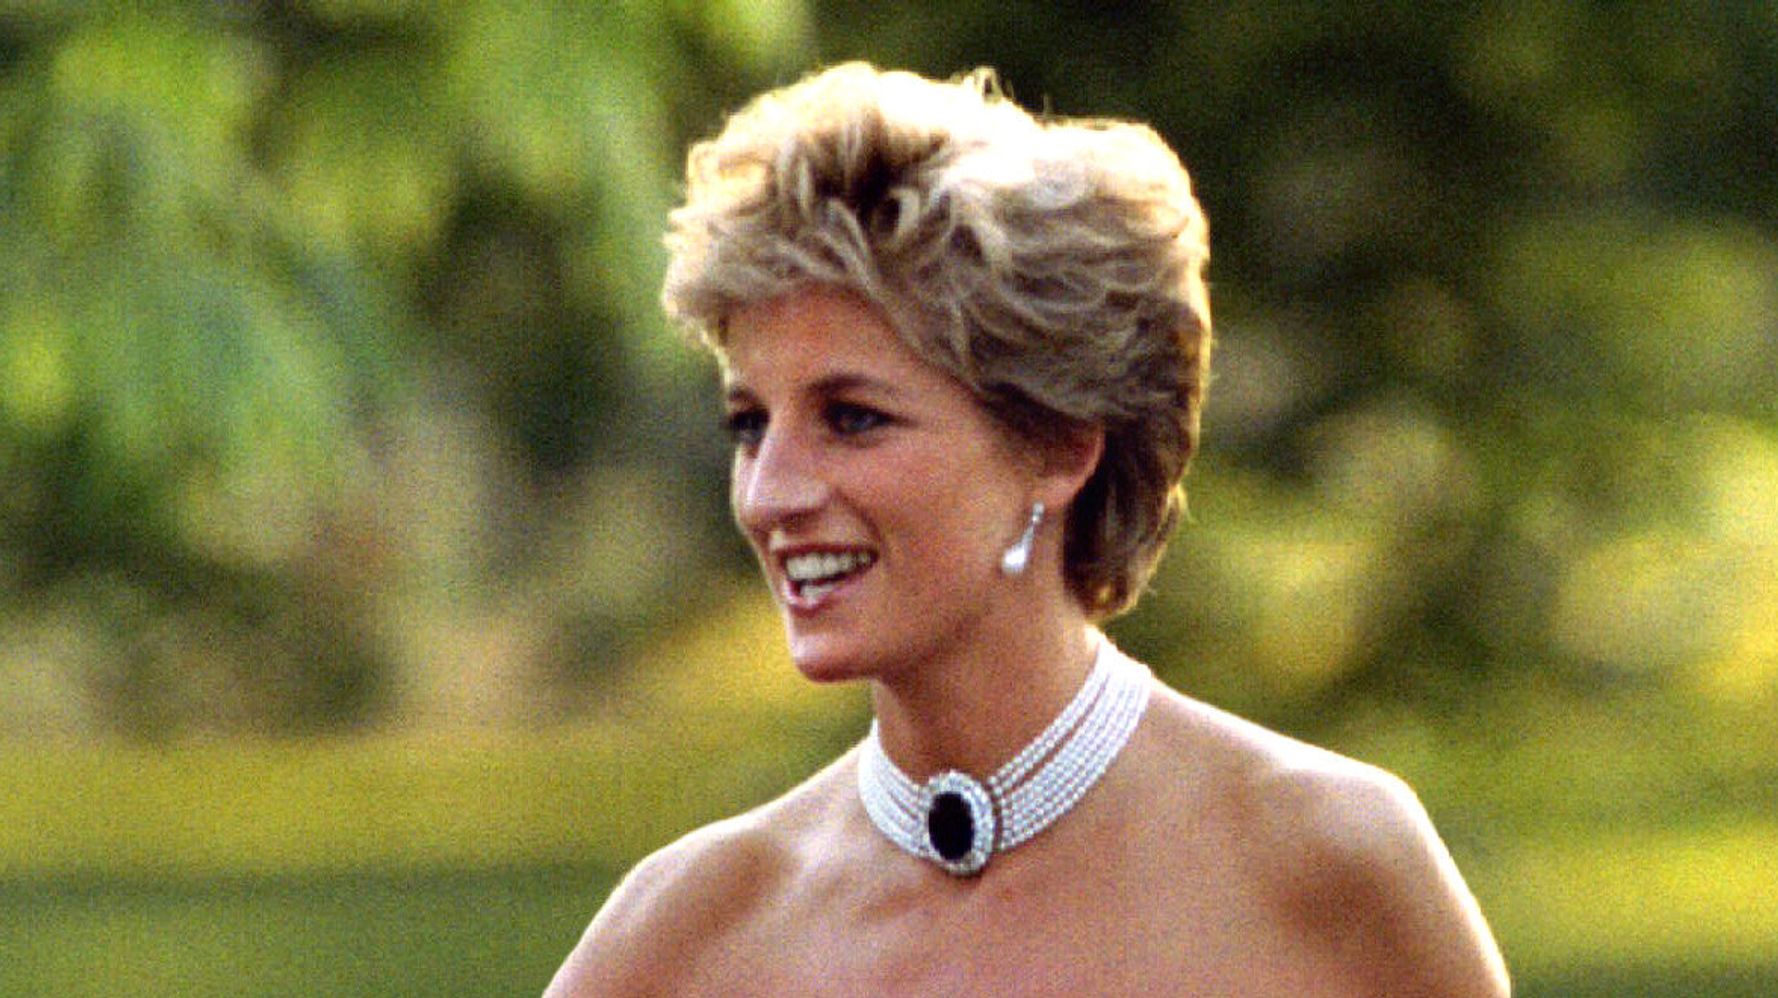 The Day Princess Diana And Her Revenge Dress Shocked The World Huffpost Life